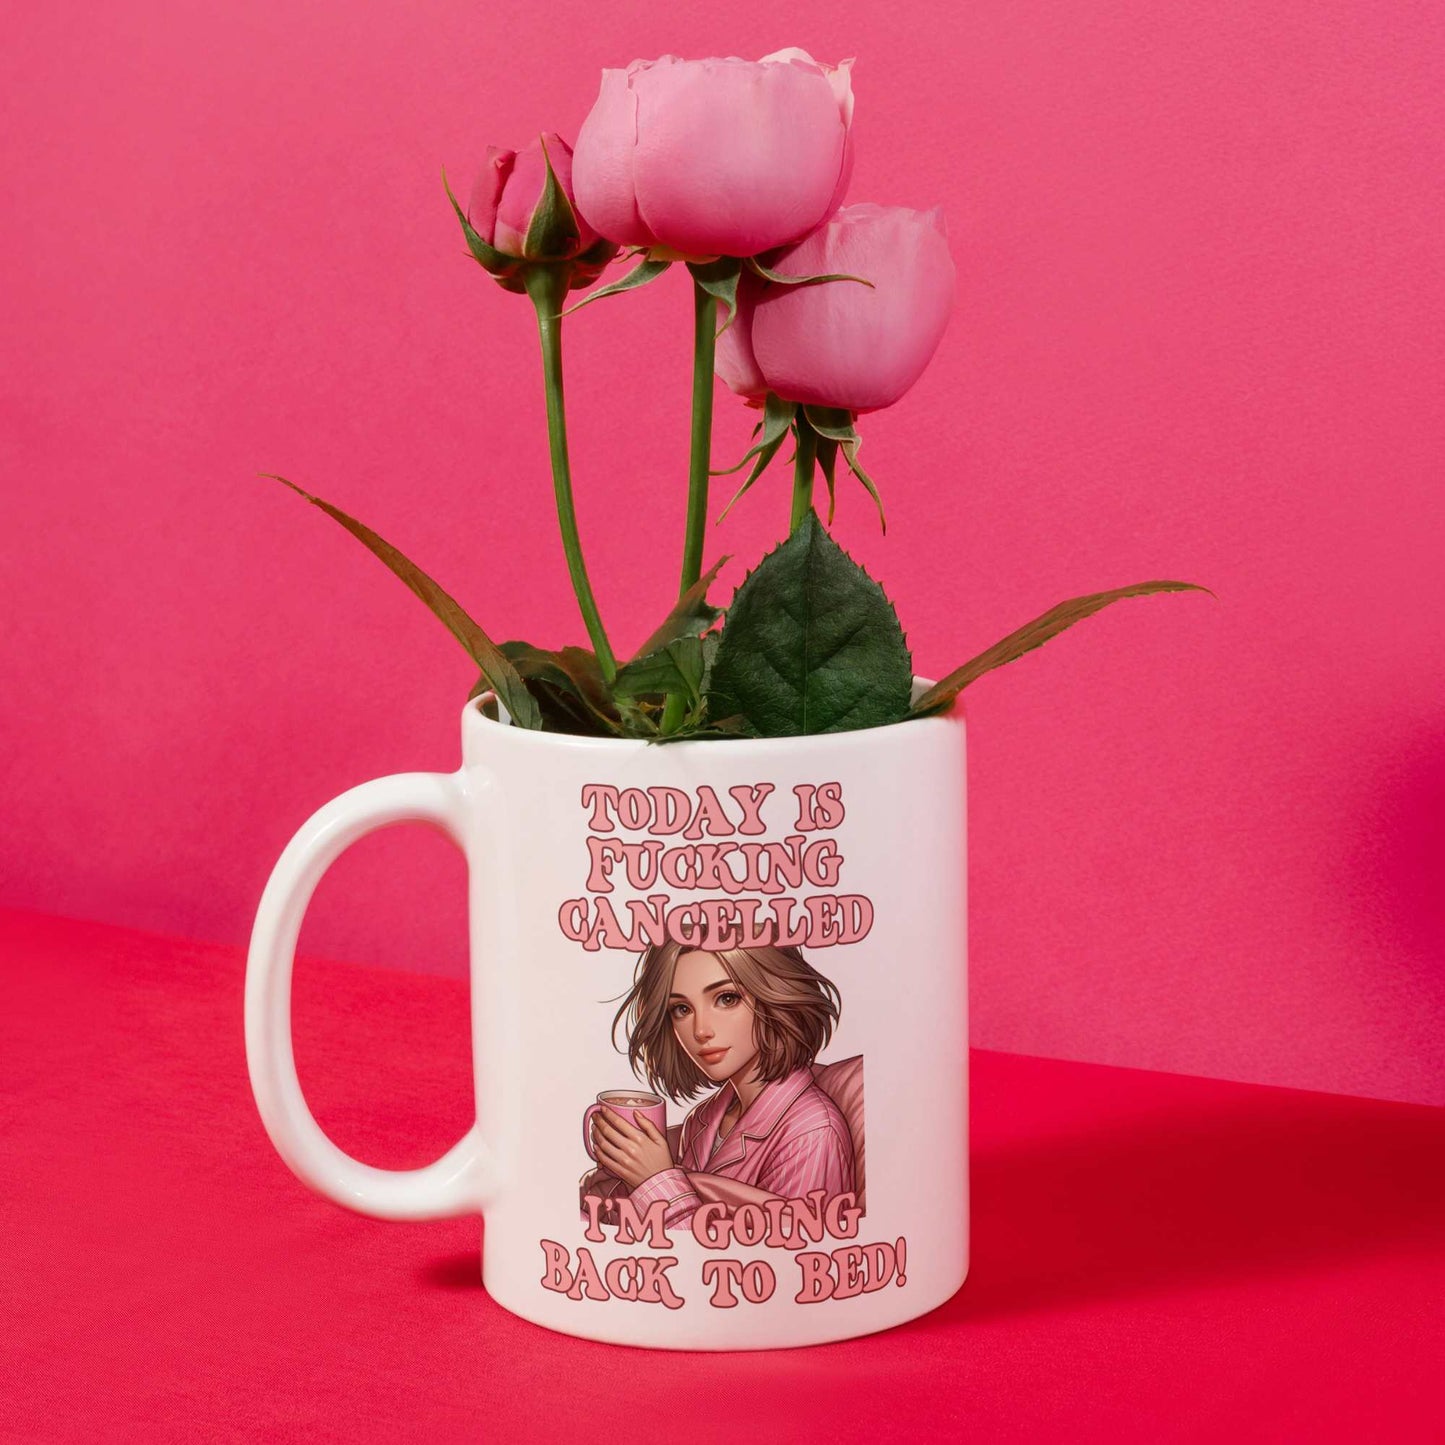 Today Is cancelled Going back to Bed Funny Mug for Her Birthday Gift for Best Friend Sister Gifts Pink Gifts for Her